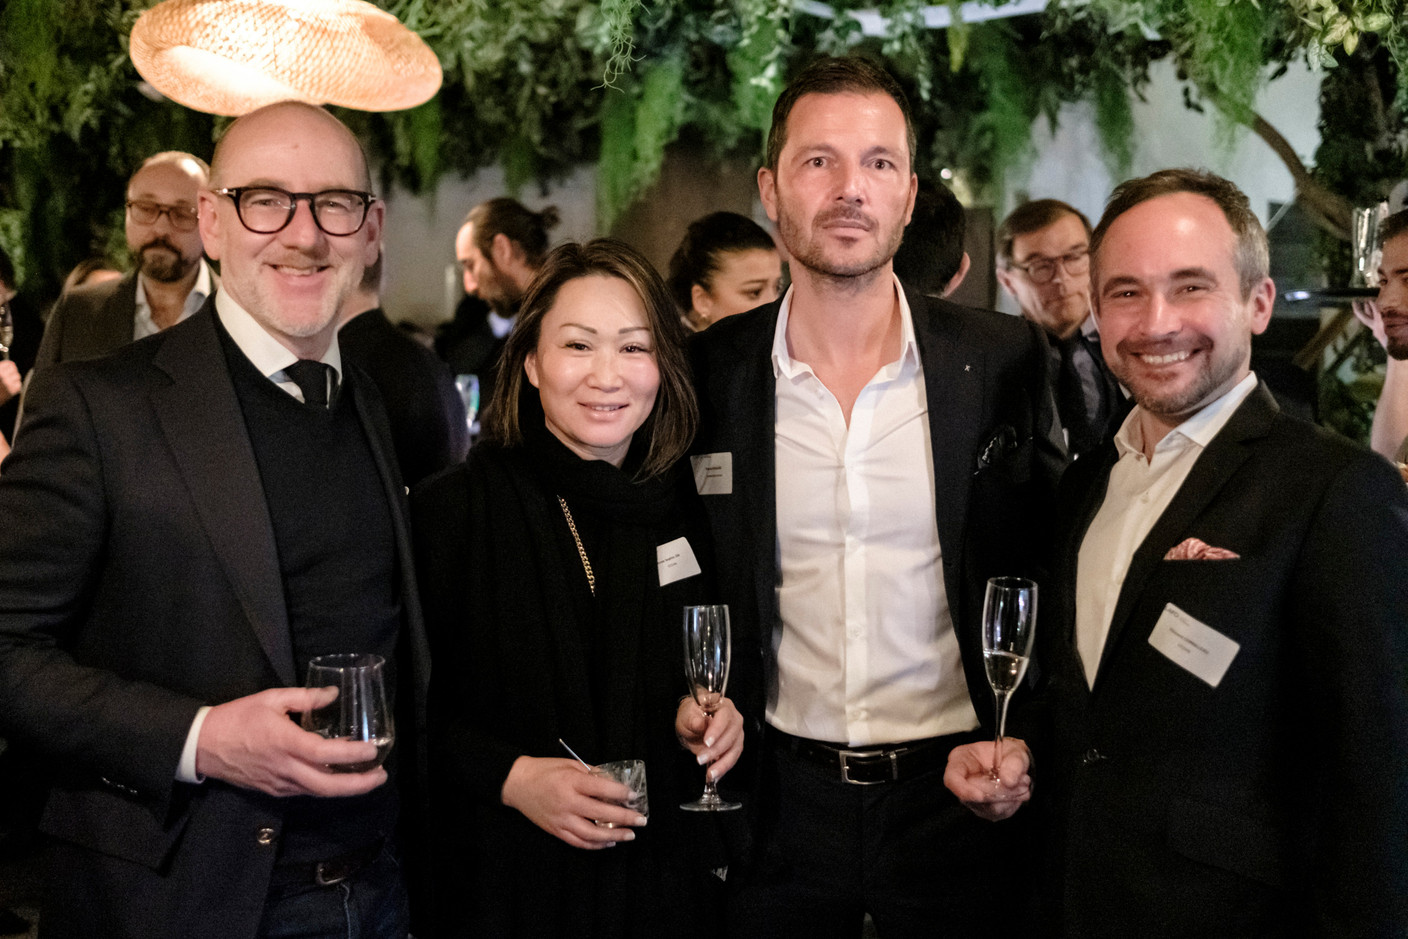 Jacques-Laurent Josse (EFG Bank), Anne-Sophie Jin (Ocean), Pascal Rapallino (Verona International) and Vincent Cornilleau (Ocean) at the Luxembourg Association of Family Offices (LAFO) winter 2023 cocktail, which took place on 8 February 2023 at Hertz PopUp. Photo: Jan Hanrion for LAFO